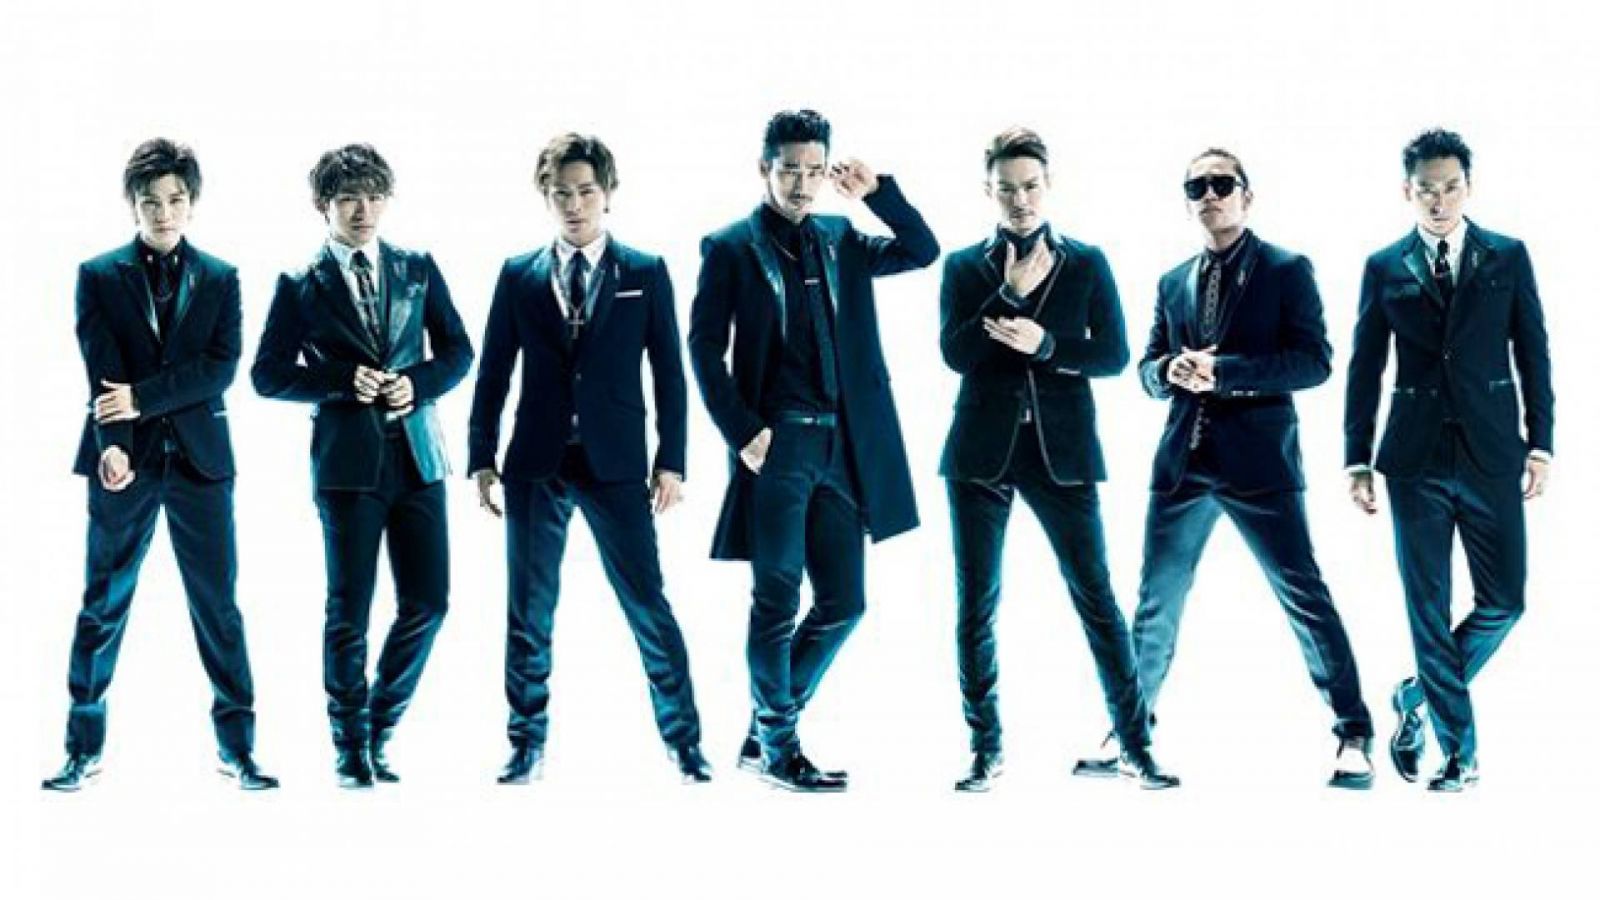 Sandaime J Soul Brothers from EXILE TRIBE lanzará un nuevo single © 2015 LDH inc., provided by PR TIMES Inc.